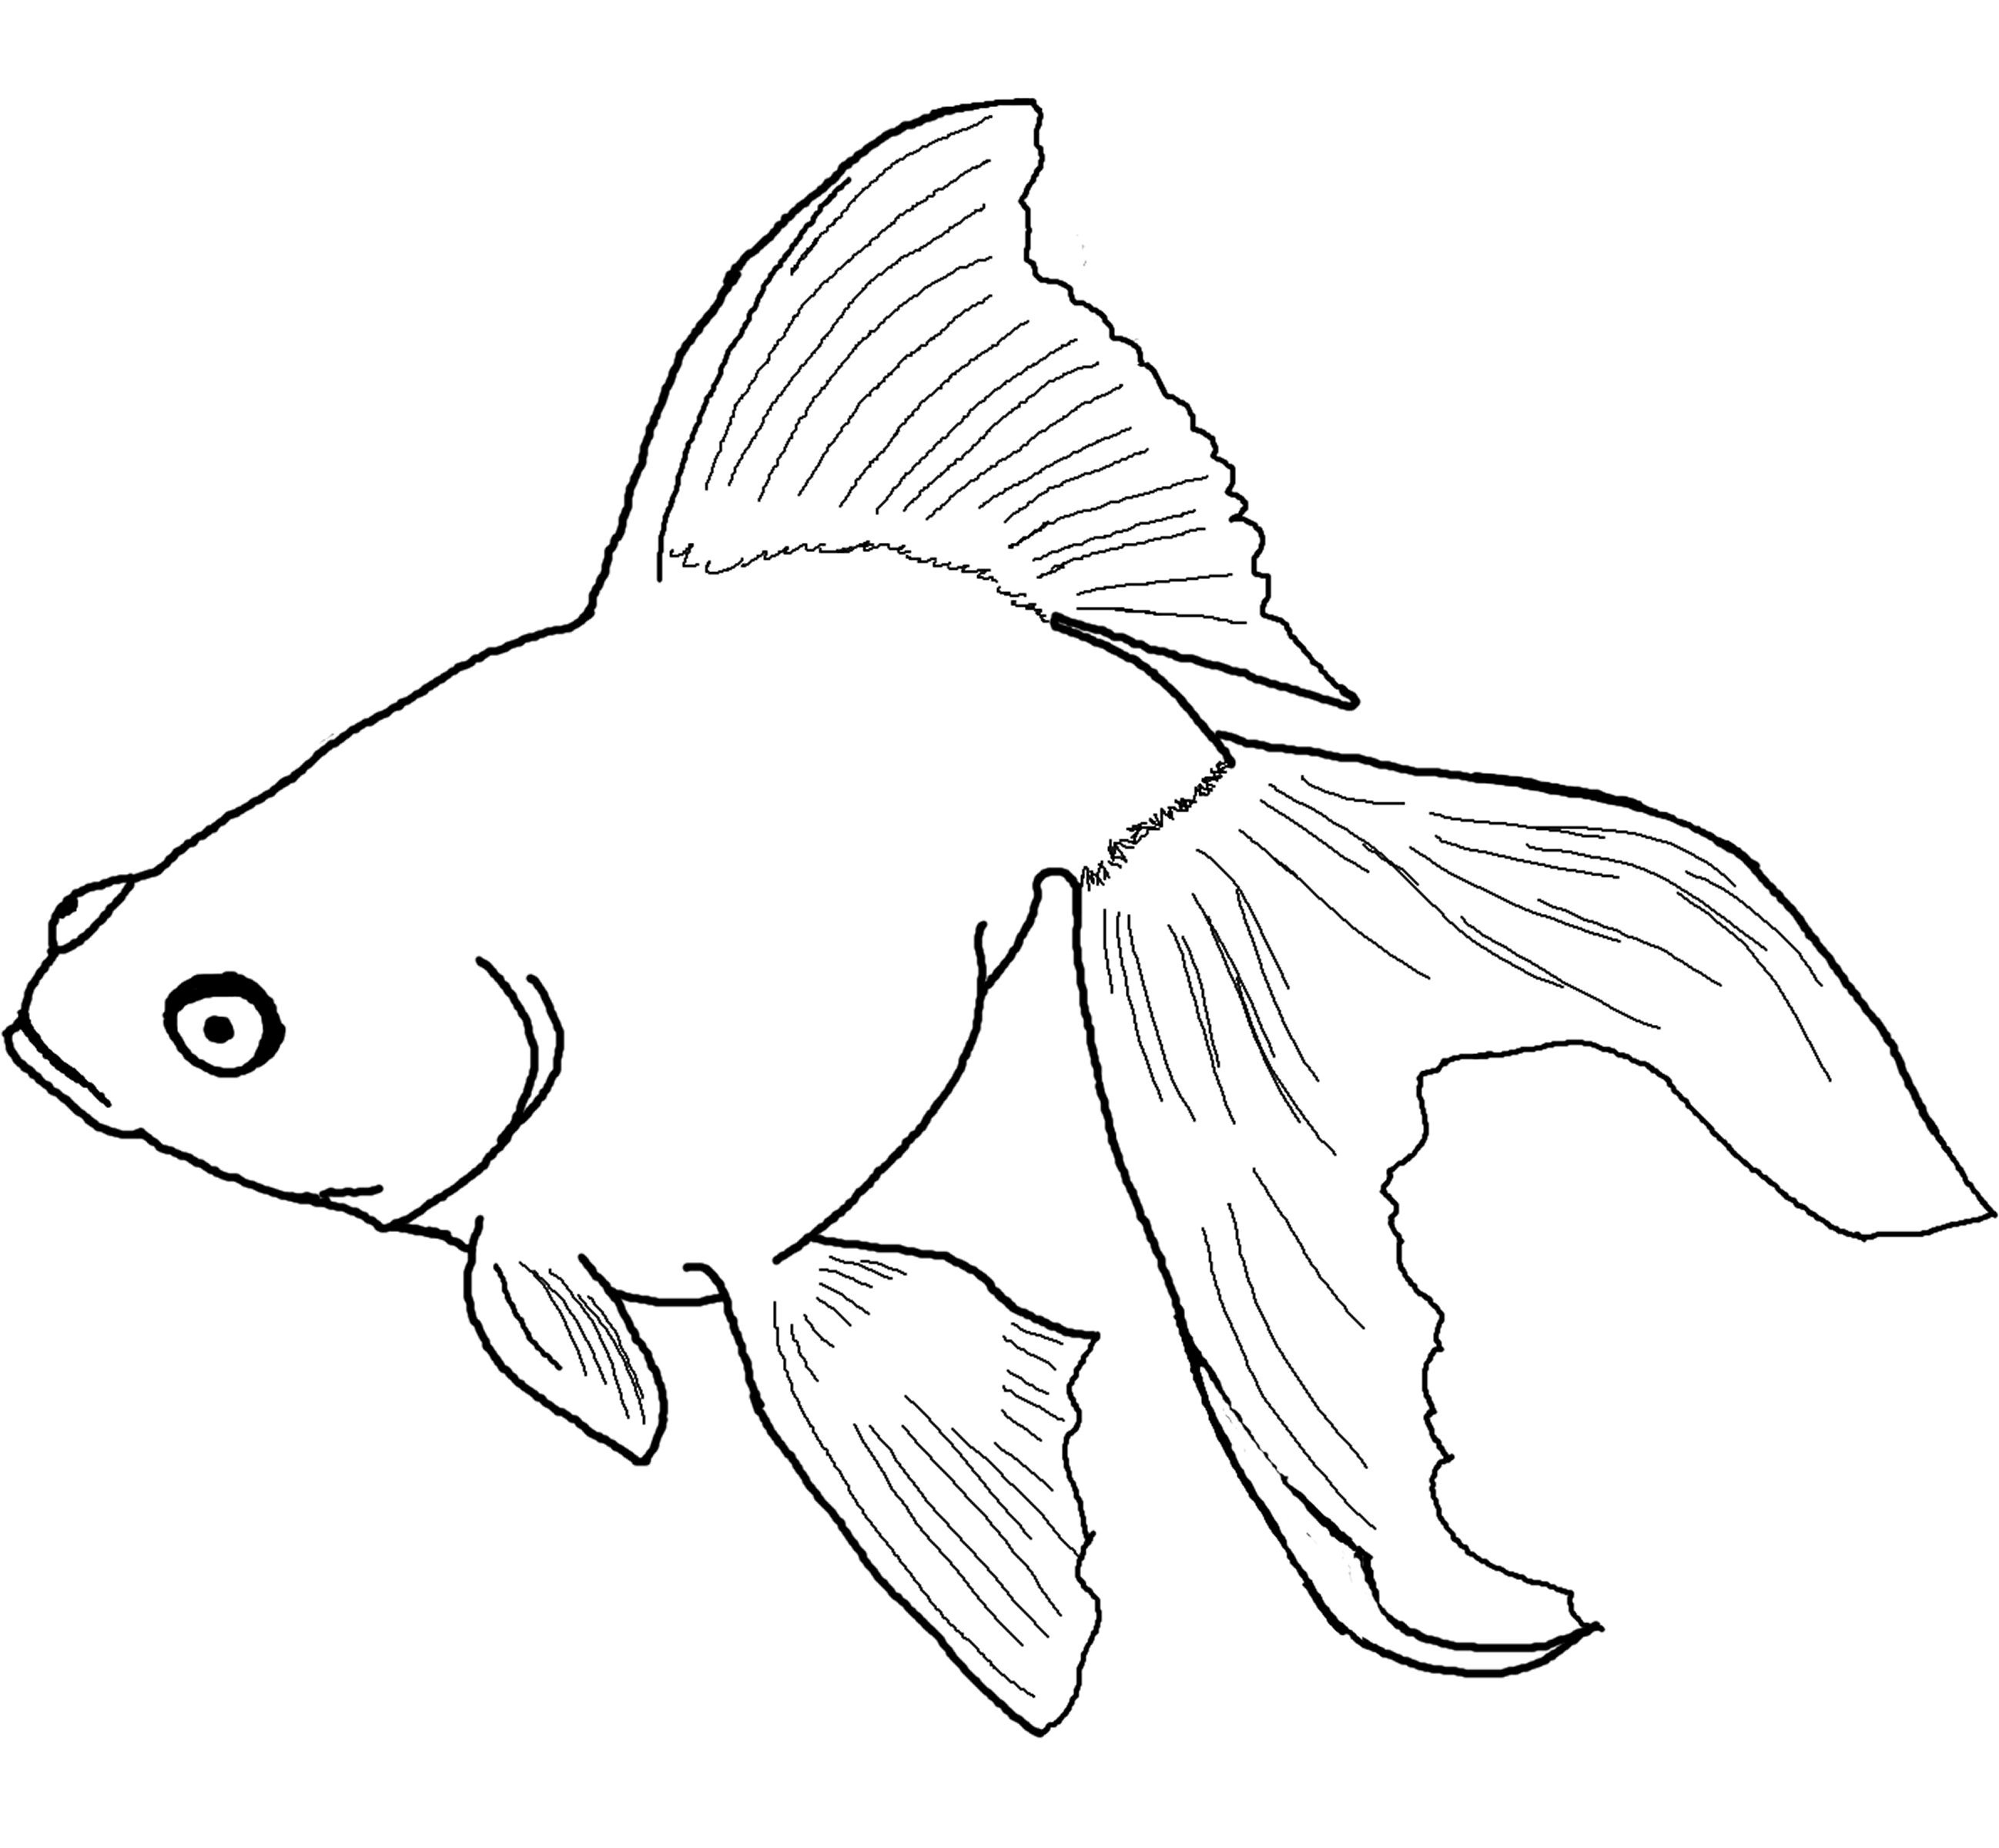 Simple Beta Fish Coloring Page for Kids